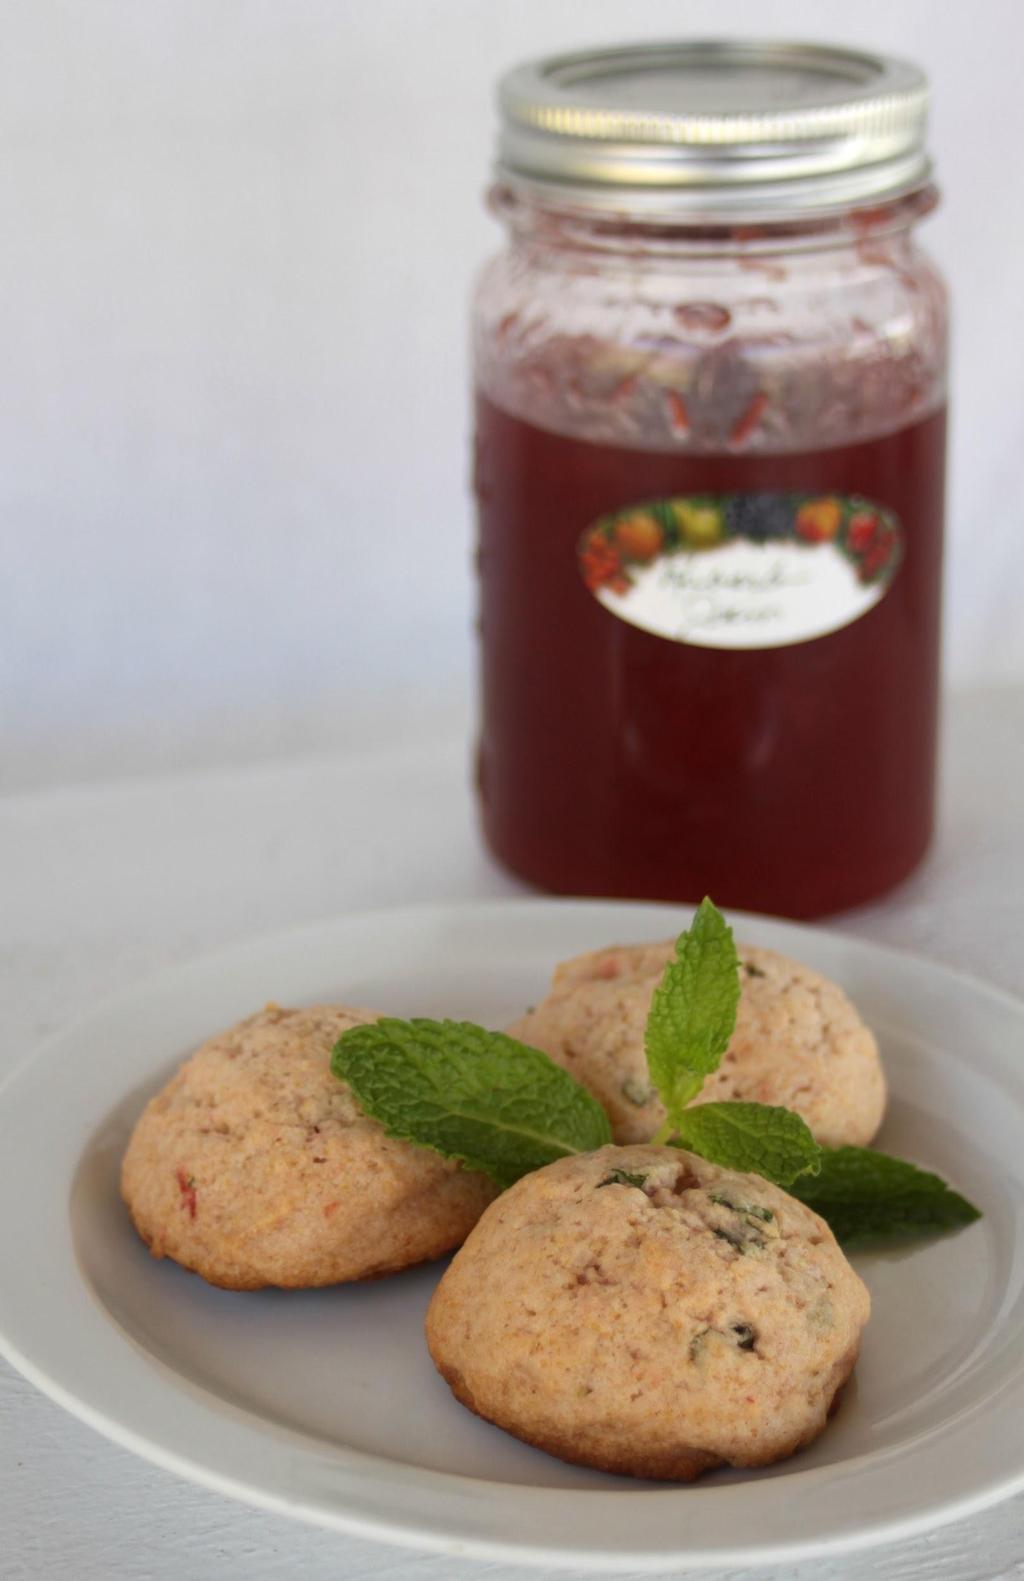 Rhubarb jam cookies 1 Cup Butter, softened ¼ Cup Sugar 1 Egg ½ Cup Rhubarb Jam 1/3 Cup Mint, chopped (1/4 ounce by weight) 2 1/3 Cups All-Purpose Flour 1 teaspoon Baking Soda Preheat oven to 350